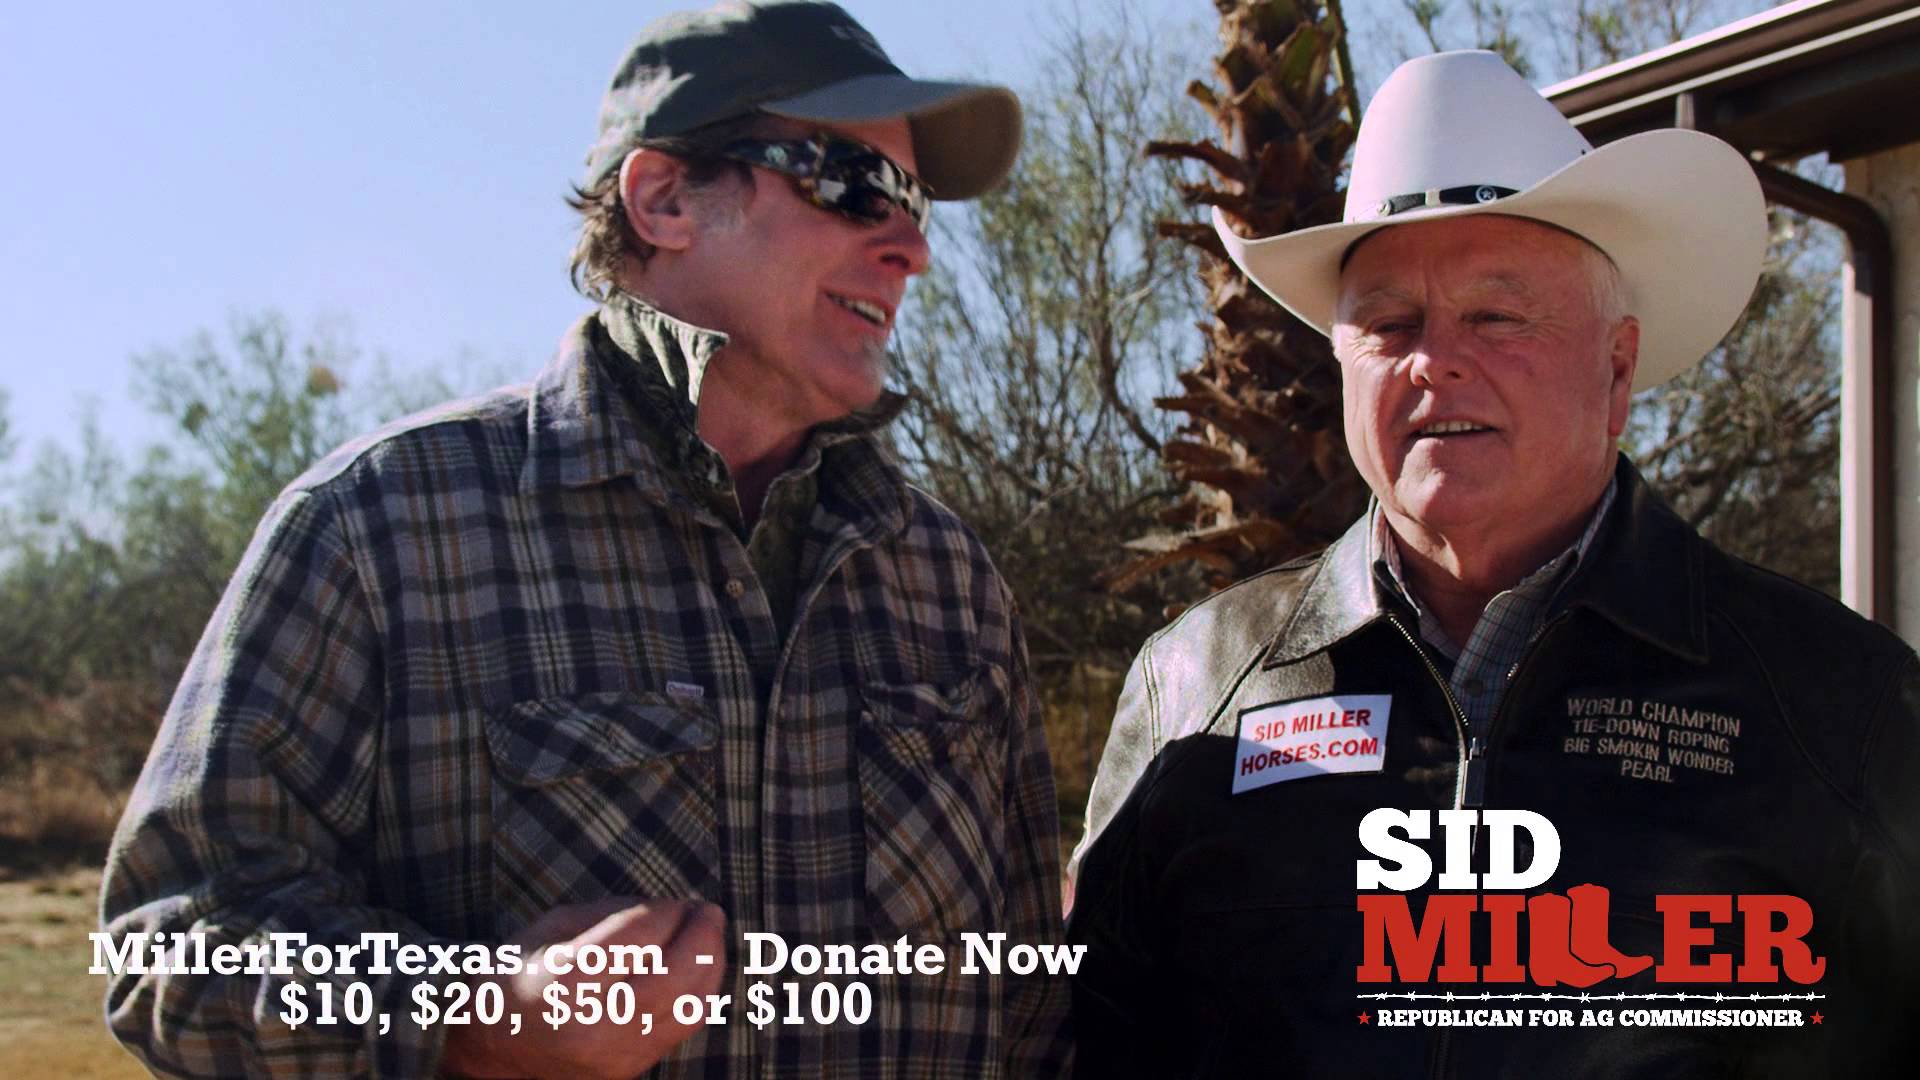 Sid Miller and Ted Nugent